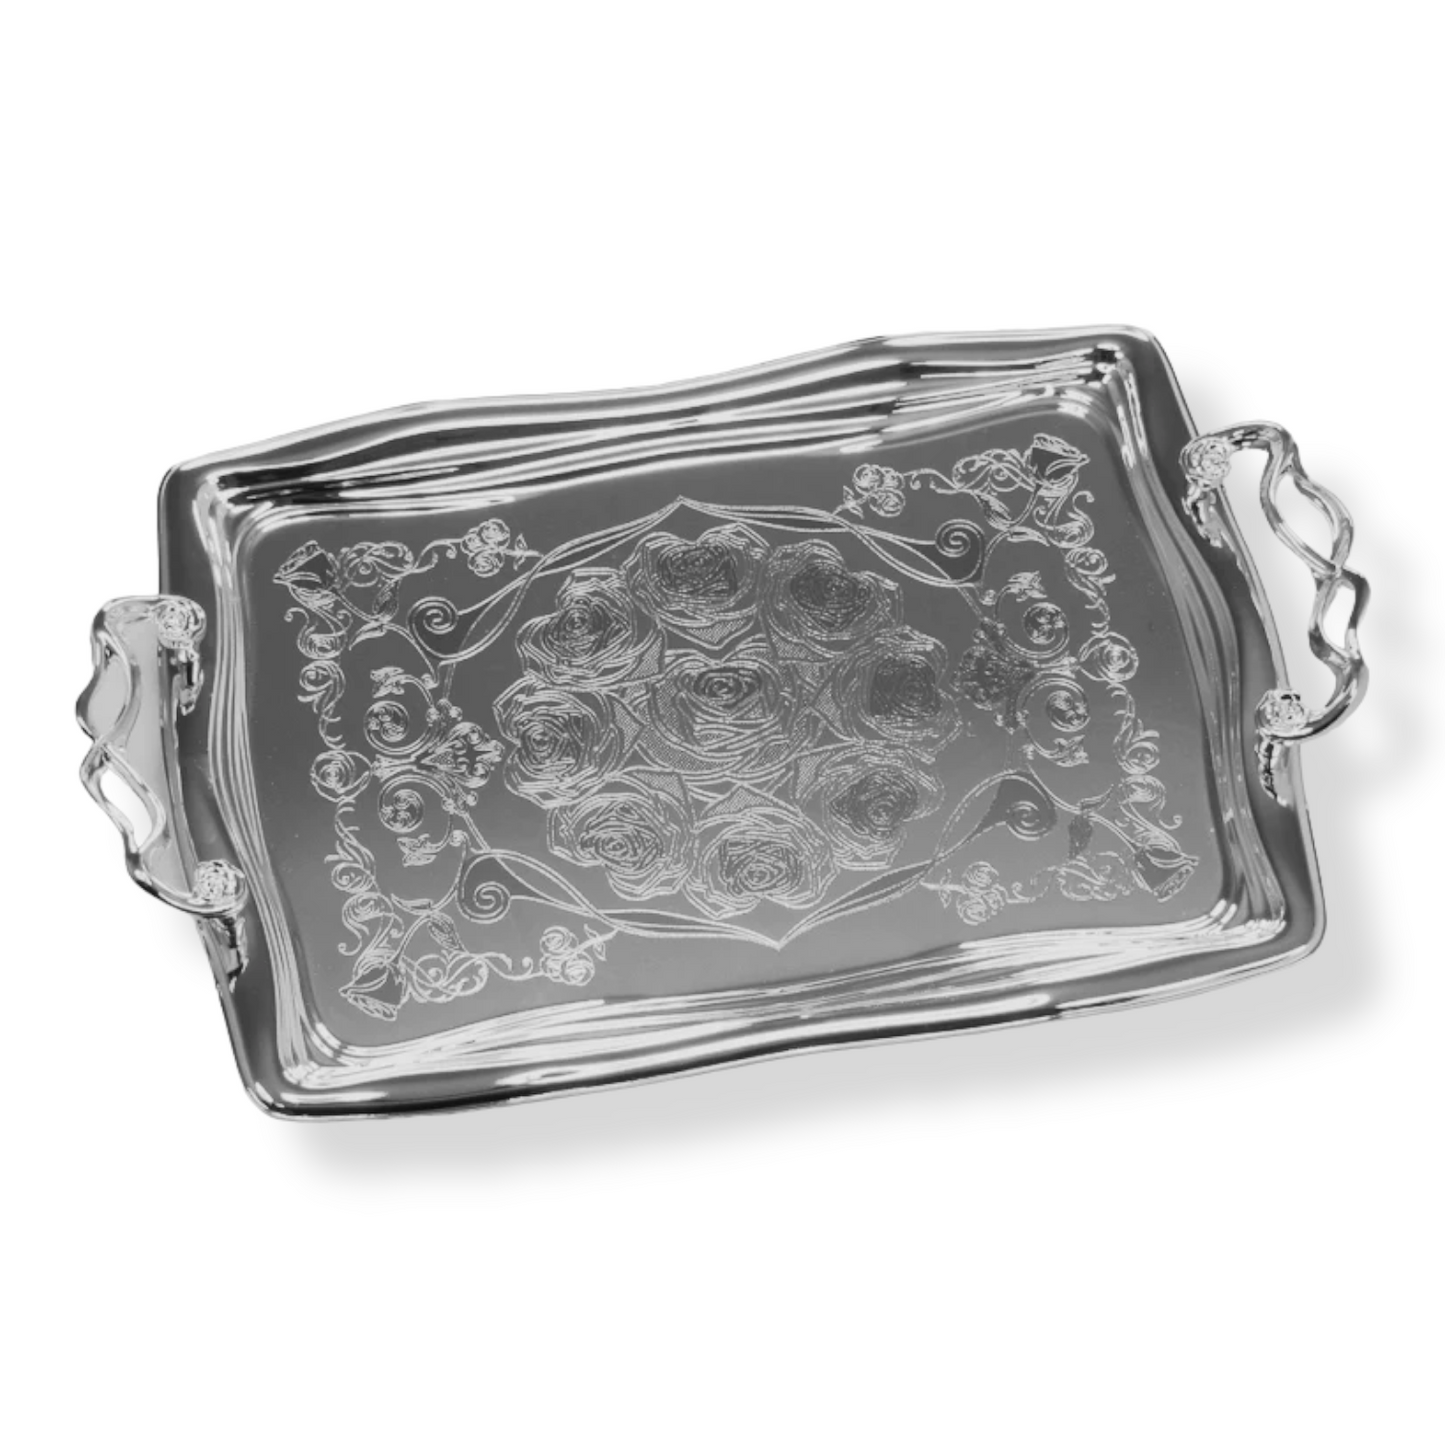 Large Stainless Steel Tray XL - Lunaz Shop